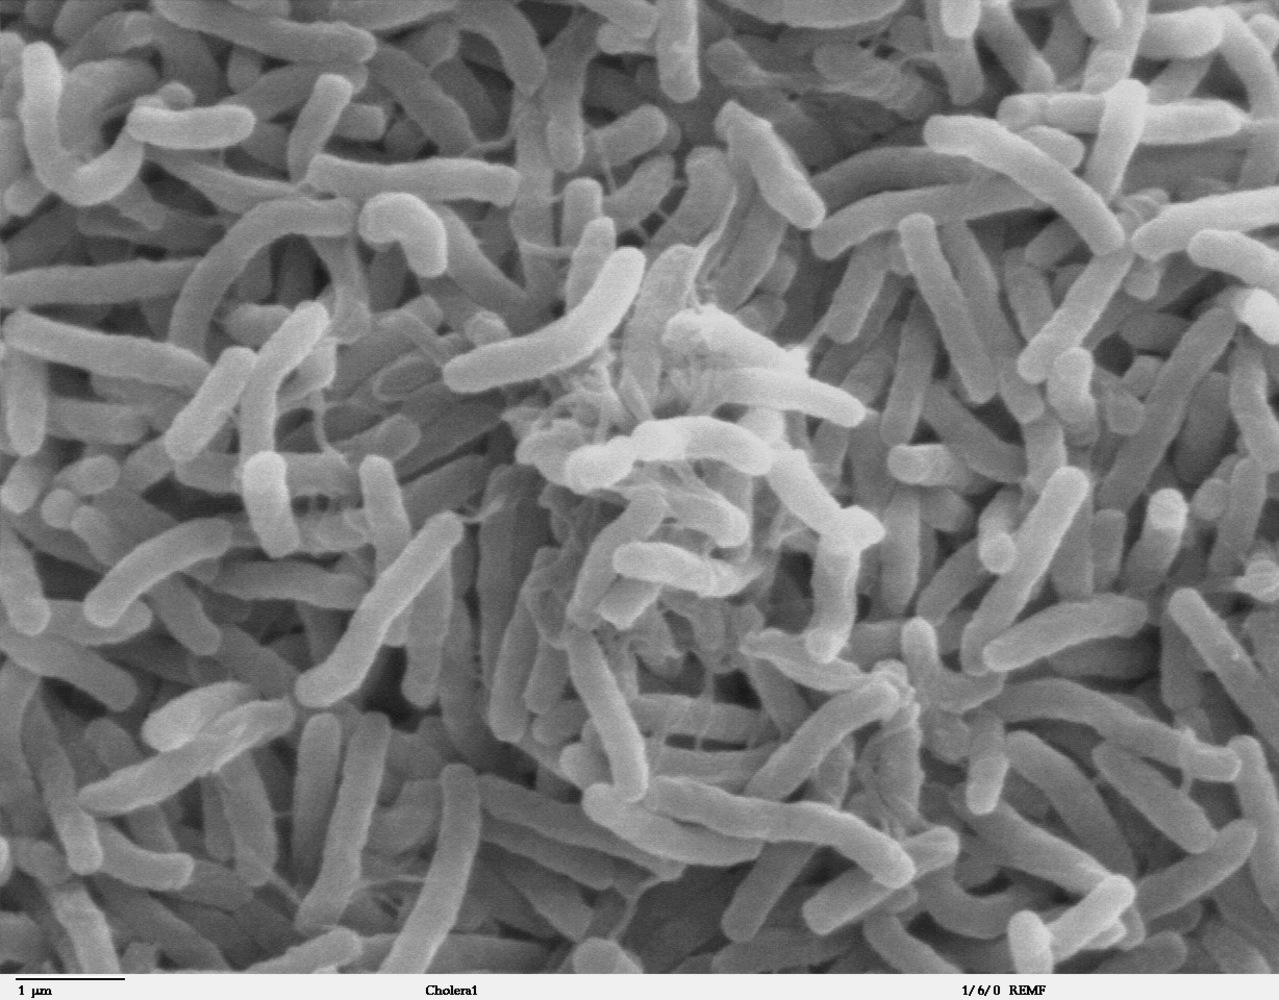 Scanning electron microscope image of Vibrio cholerae bacteria, which infect the digestive system.